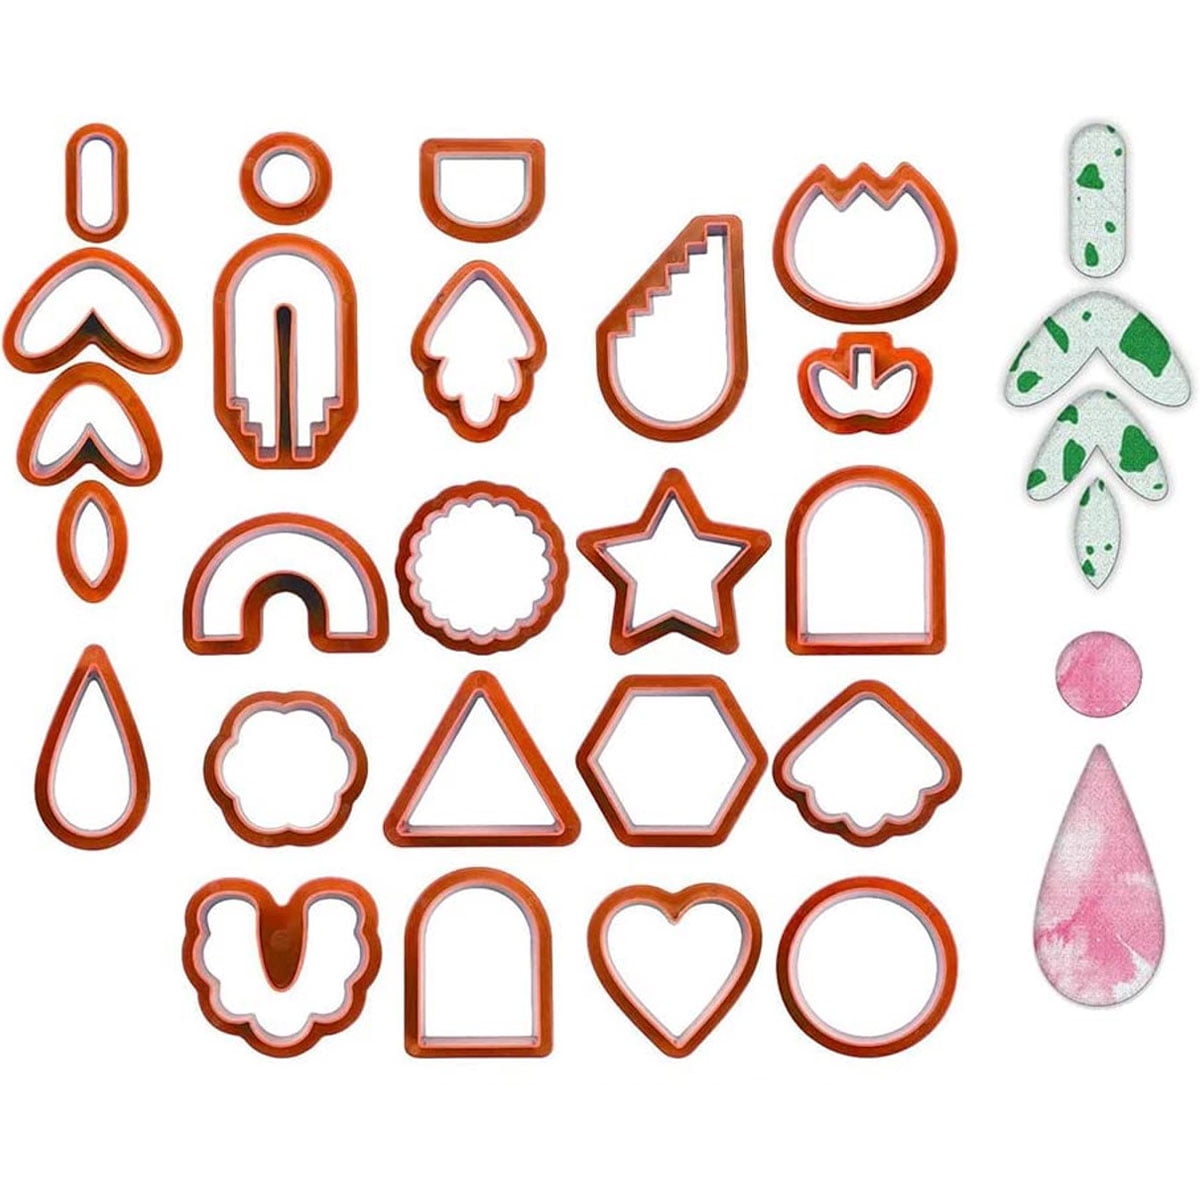 Polymer Clay Cutters 169 Pcs Clay Earring Cutters Jewelry Making Polymer  Clay Cutter Mini Cookie Cutter Shapes Set - AliExpress